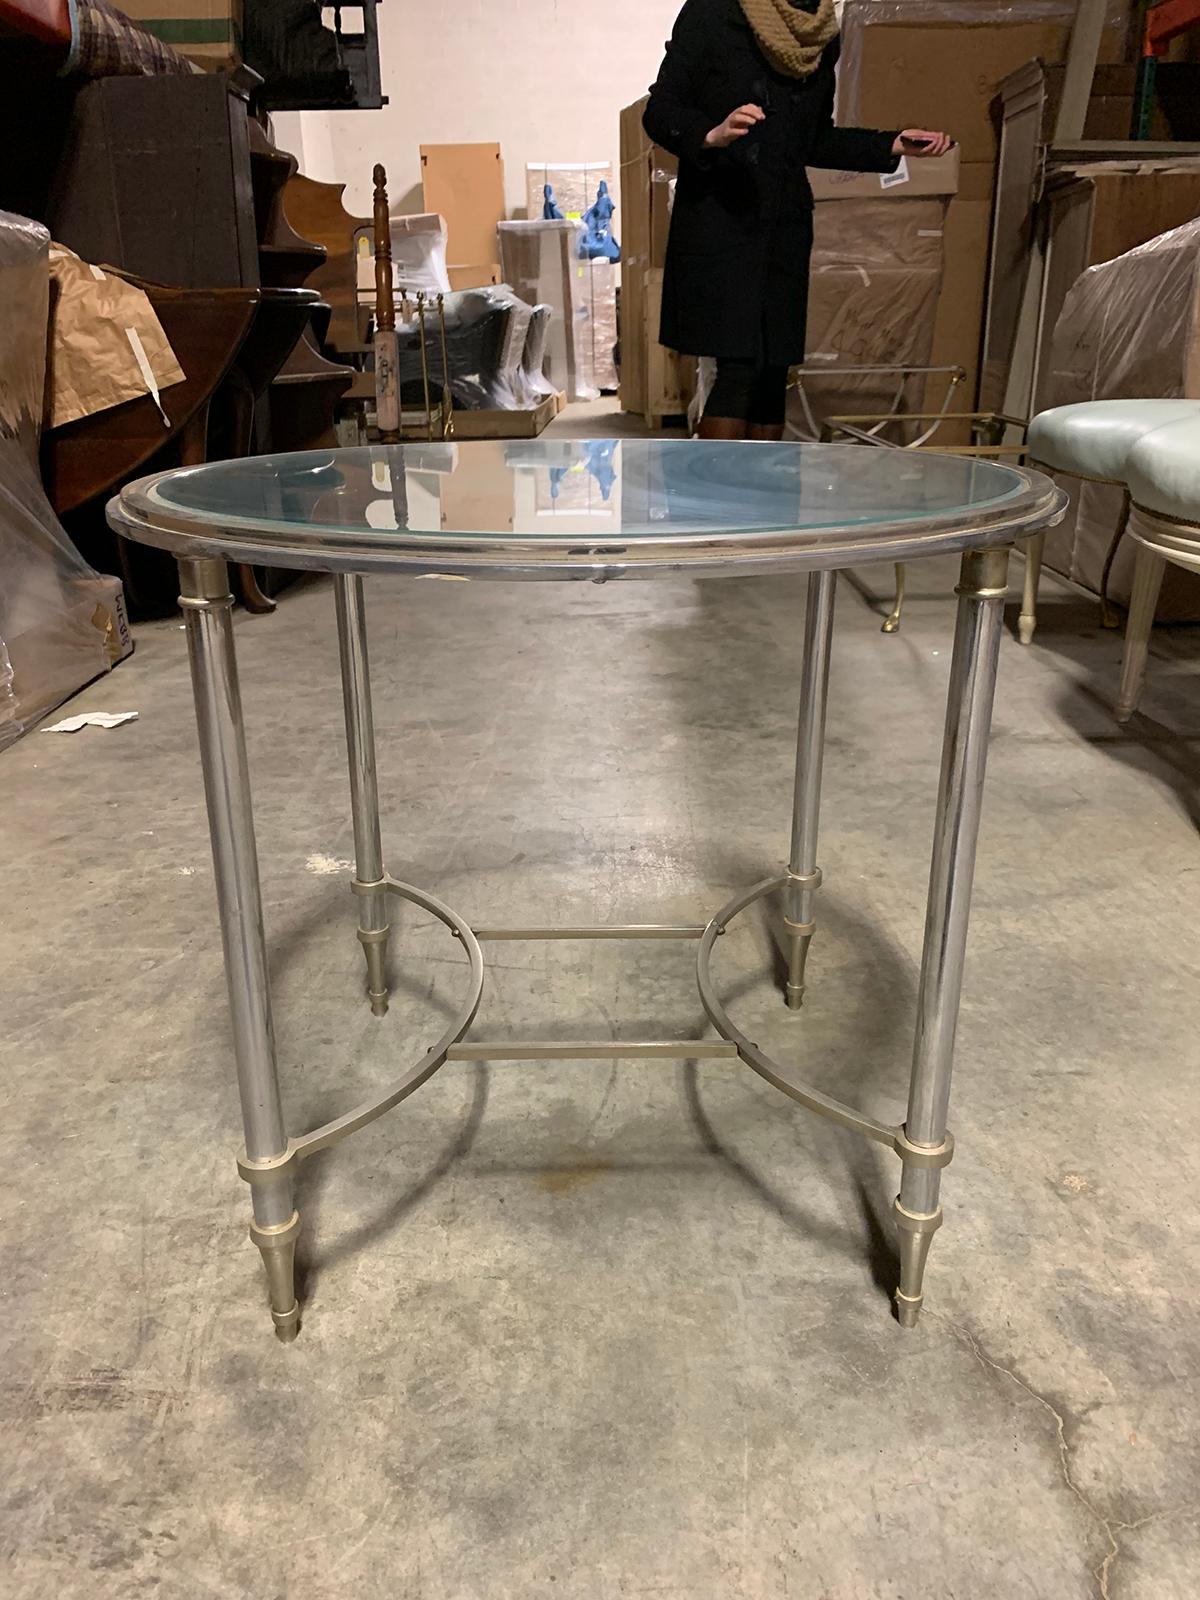 20th century round steel and glass table attributed to Maison Jansen.